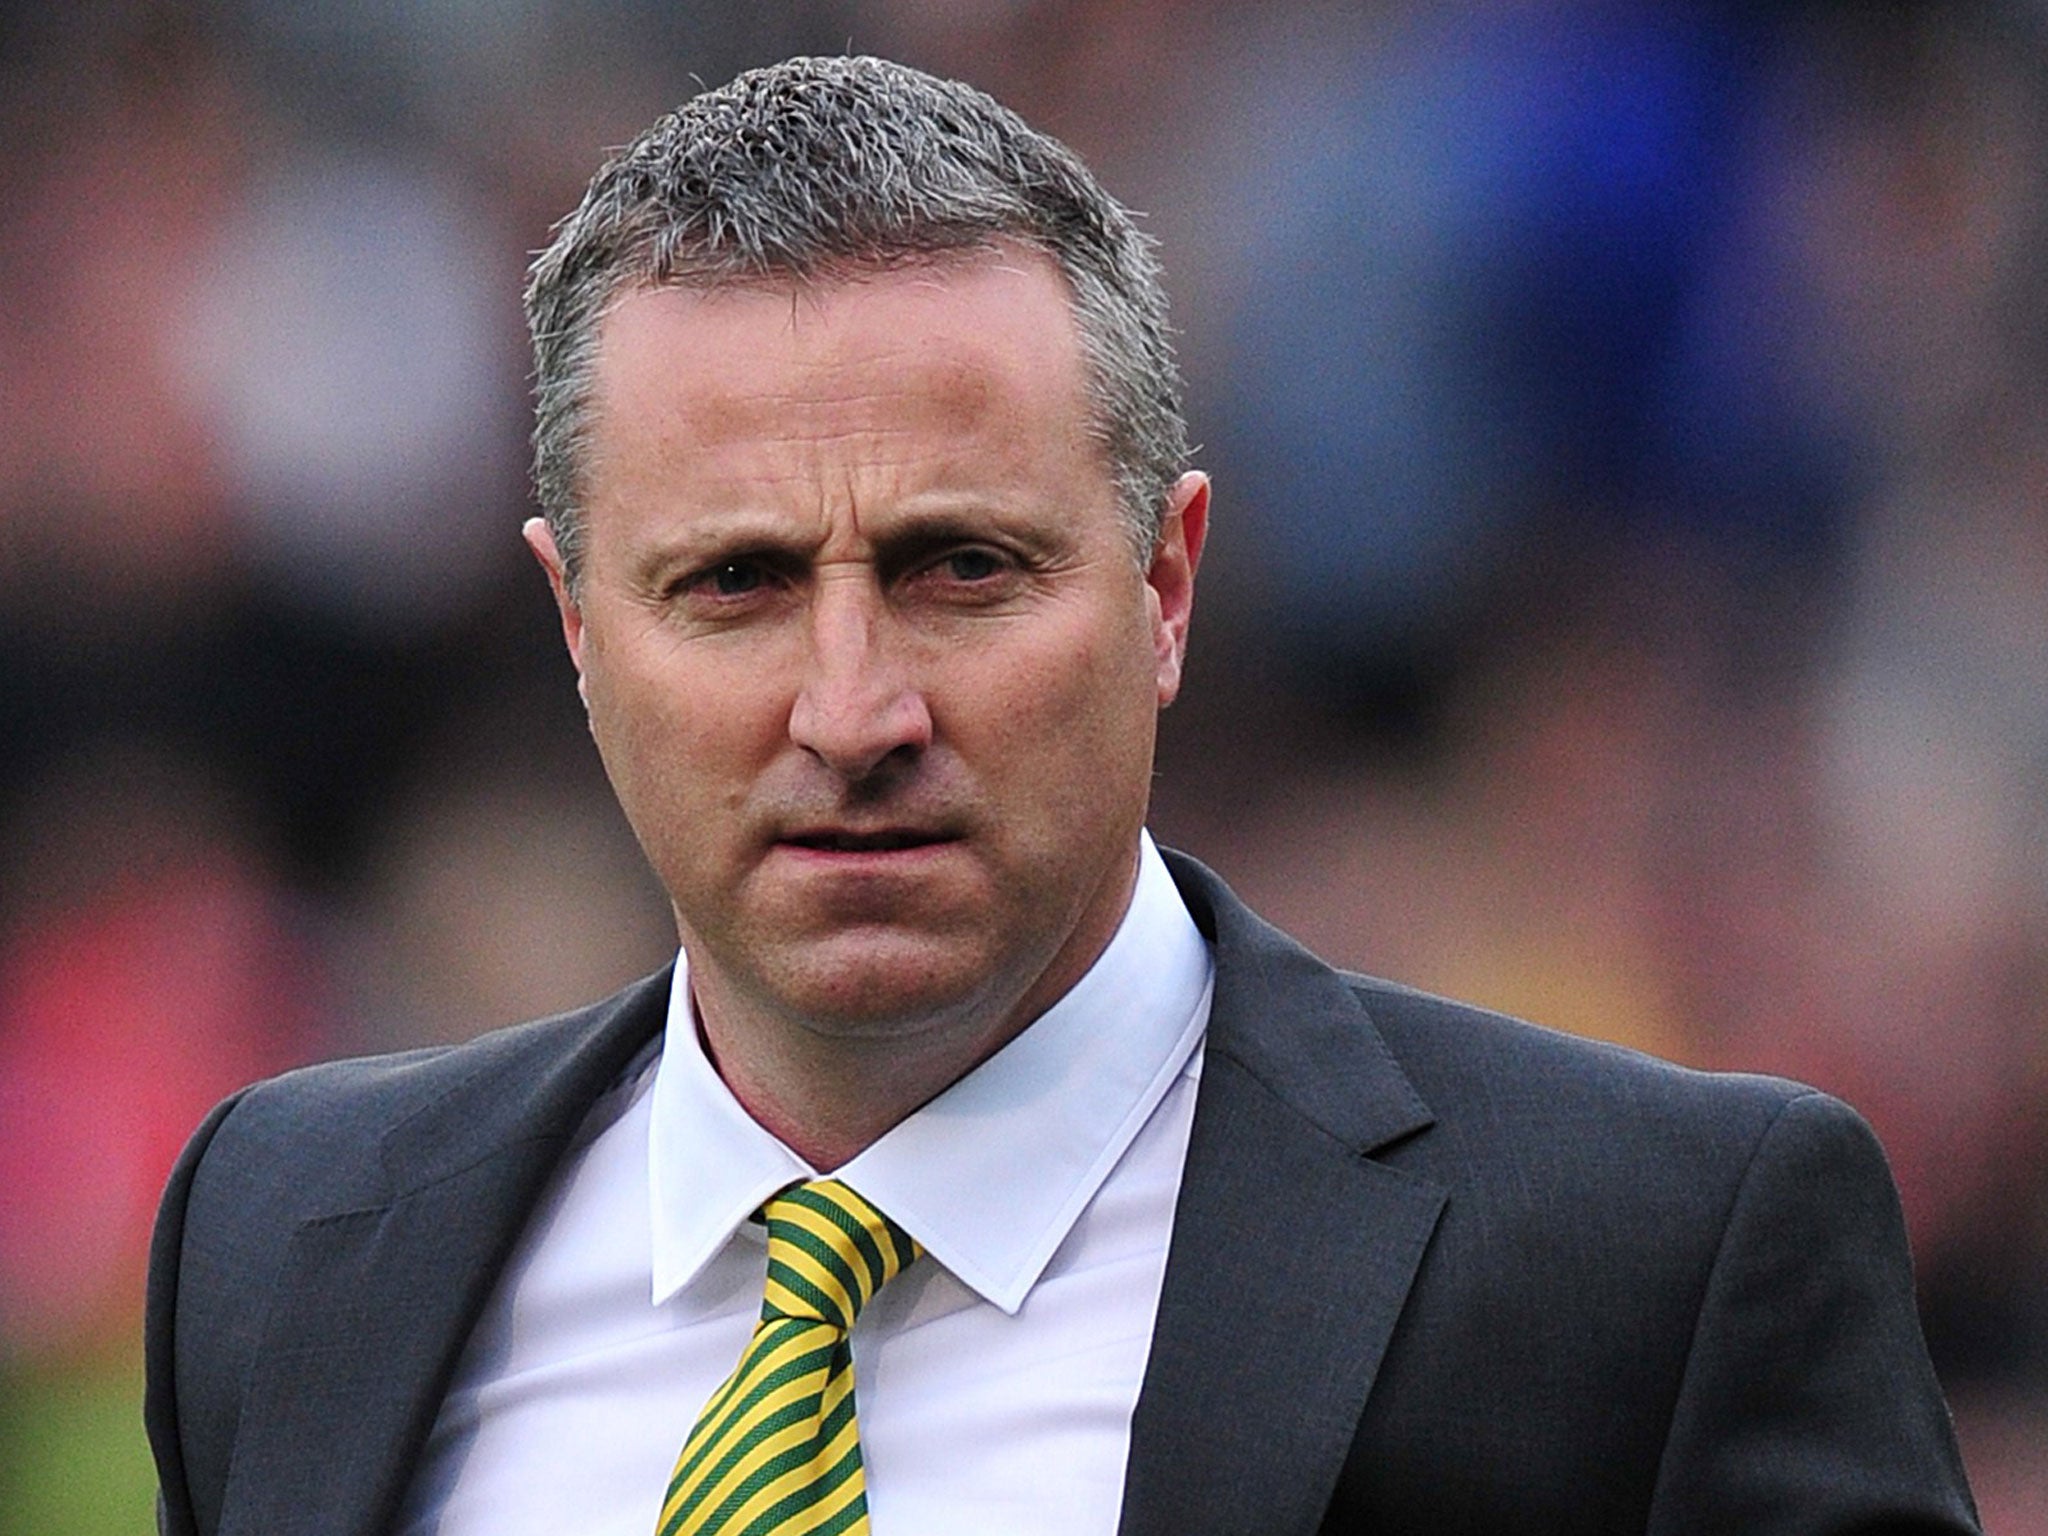 Norwich City manager Neil Adams looks on at Craven Cottage